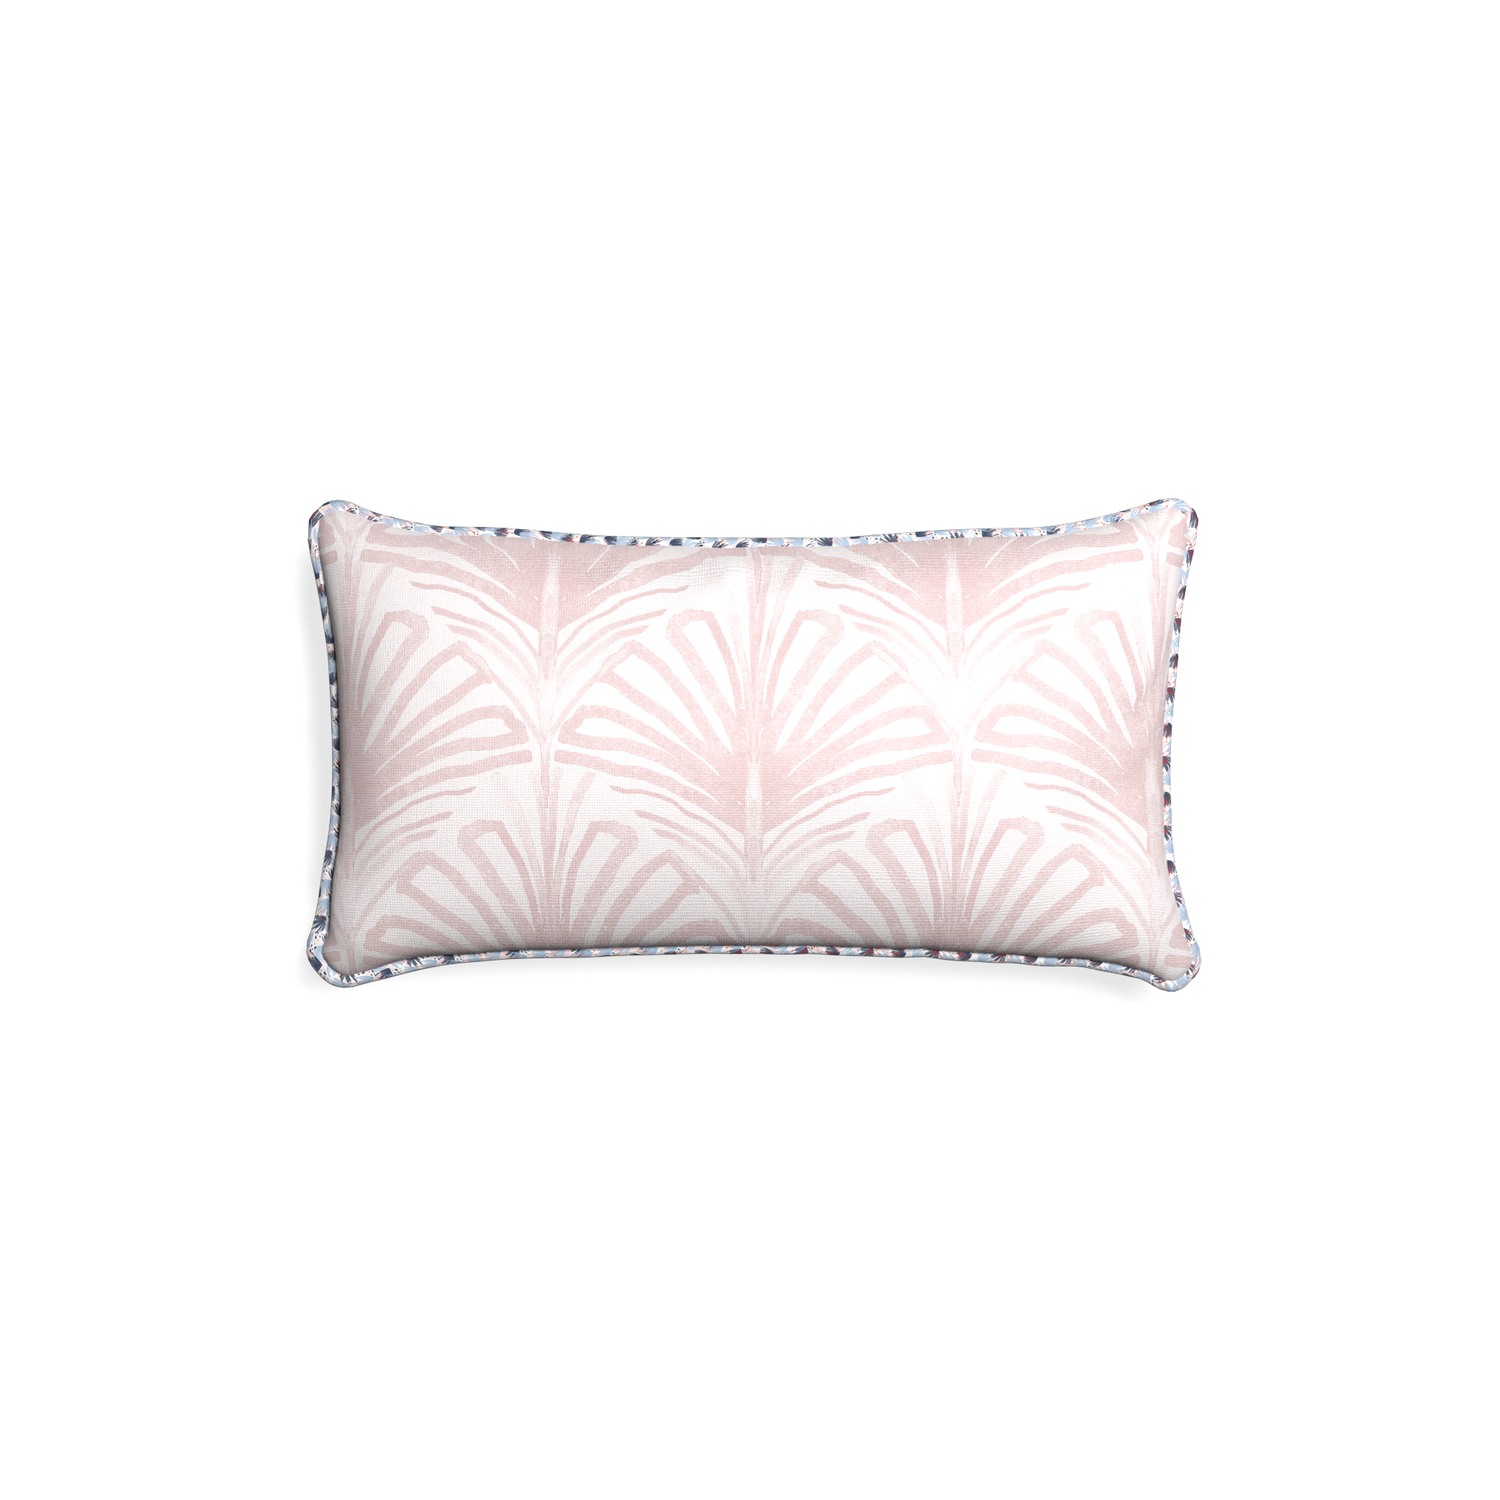 Petite-lumbar suzy rose custom rose pink palmpillow with e piping on white background